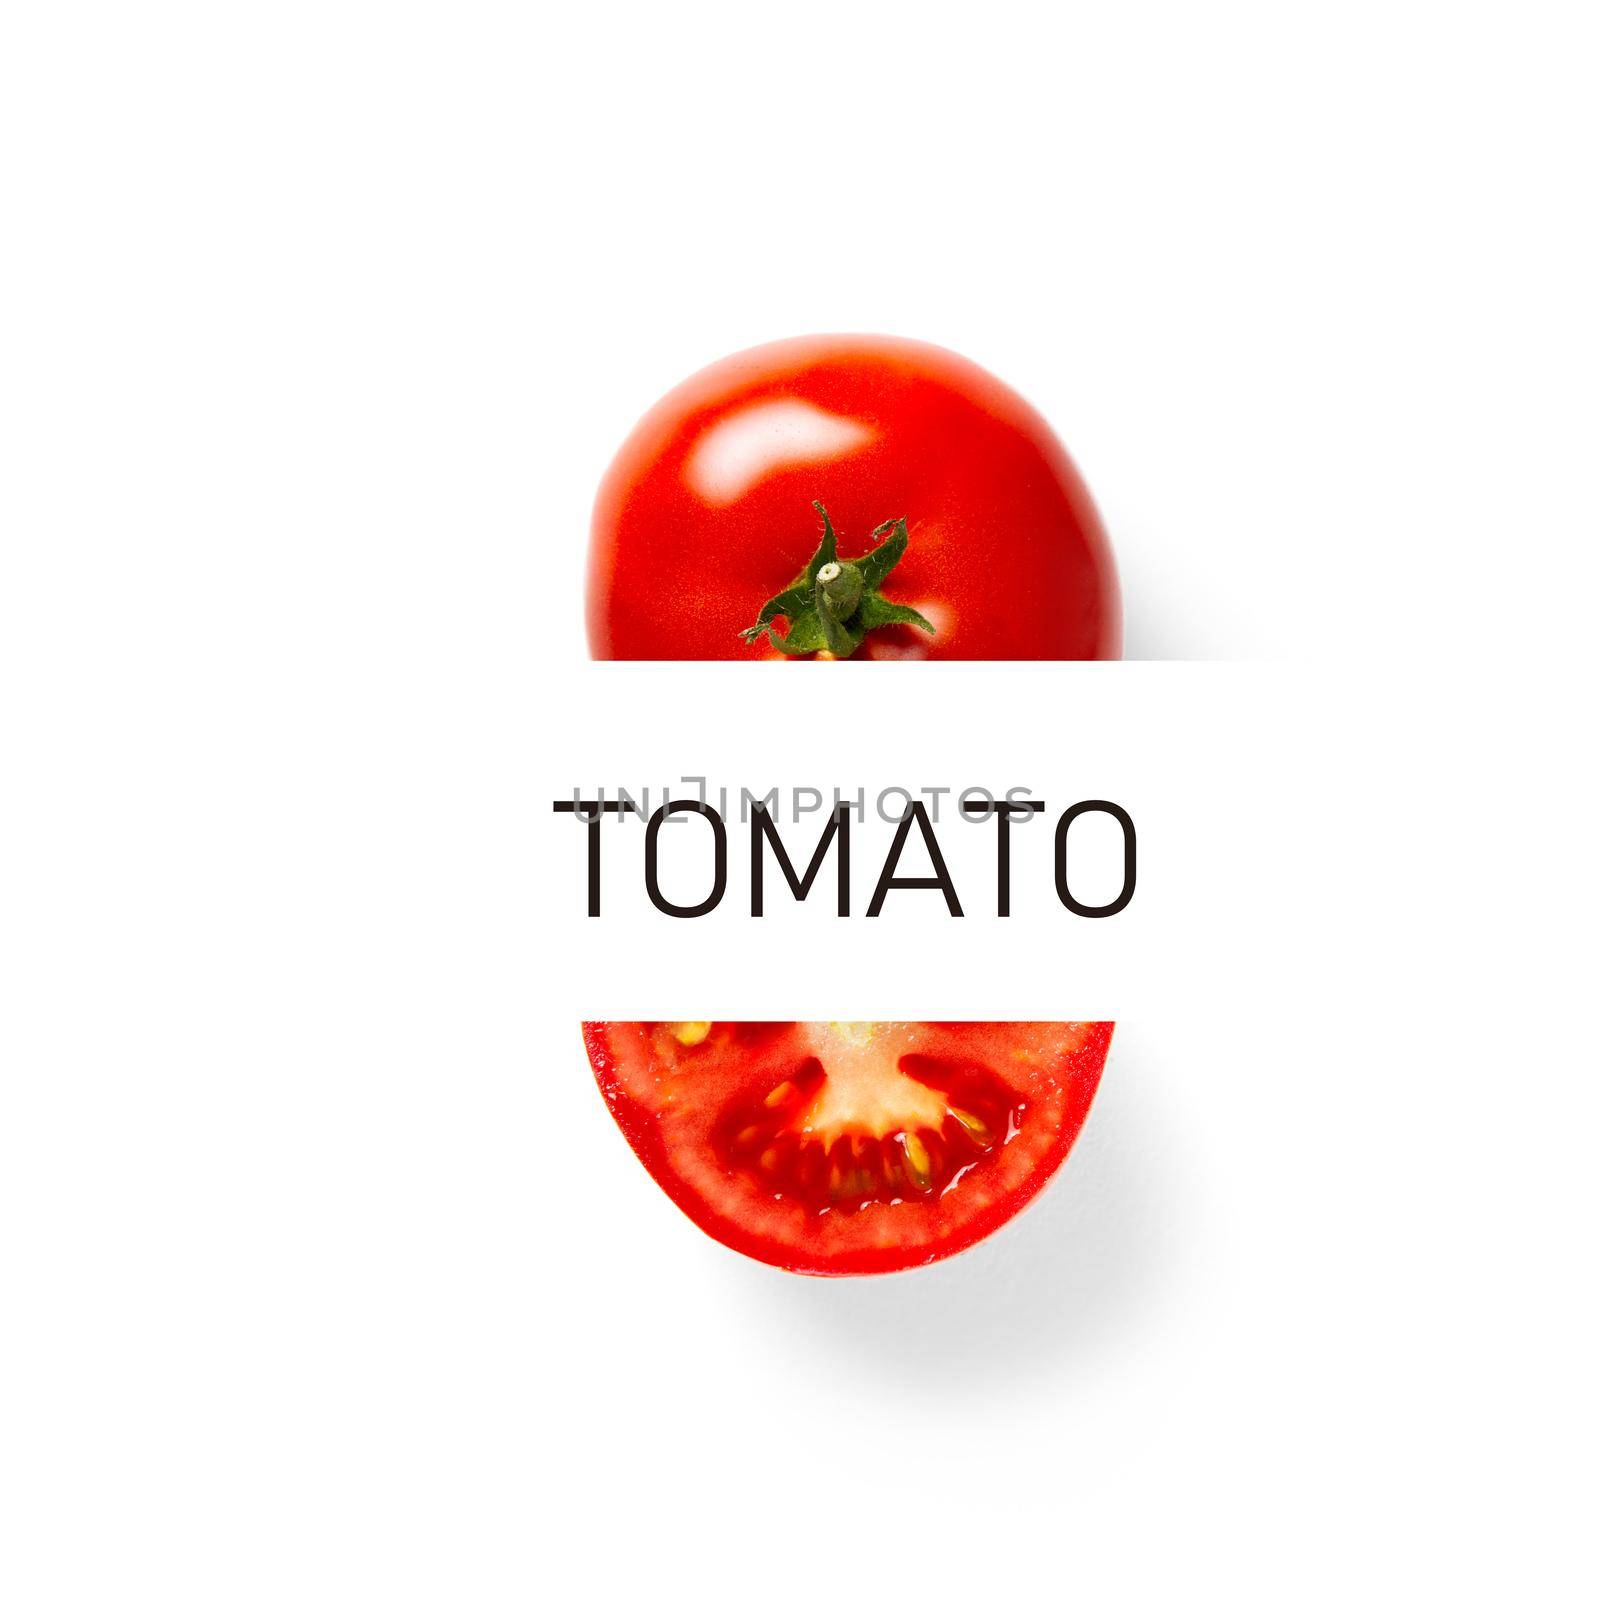 Tomato creative layout and composition isolated on white background Healthy eating, dieting concept by PhotoTime